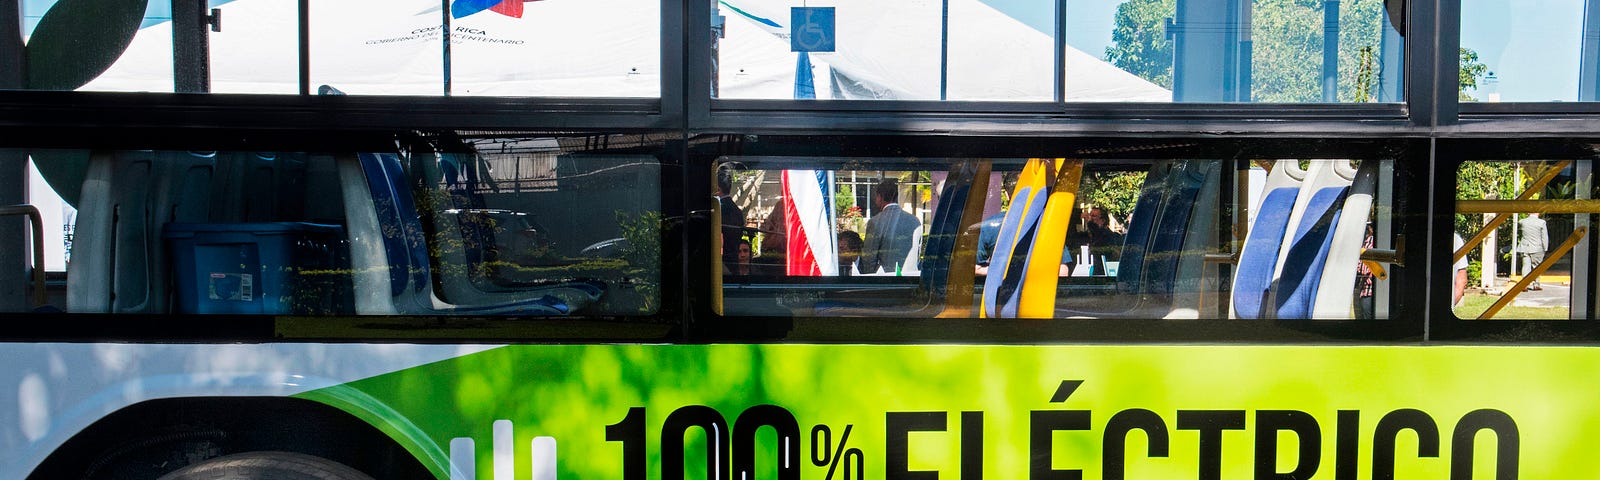 An electric bus in San José, Costa Rica, March 5, 2020. Photo by Ezequiel Becerra/Getty Images